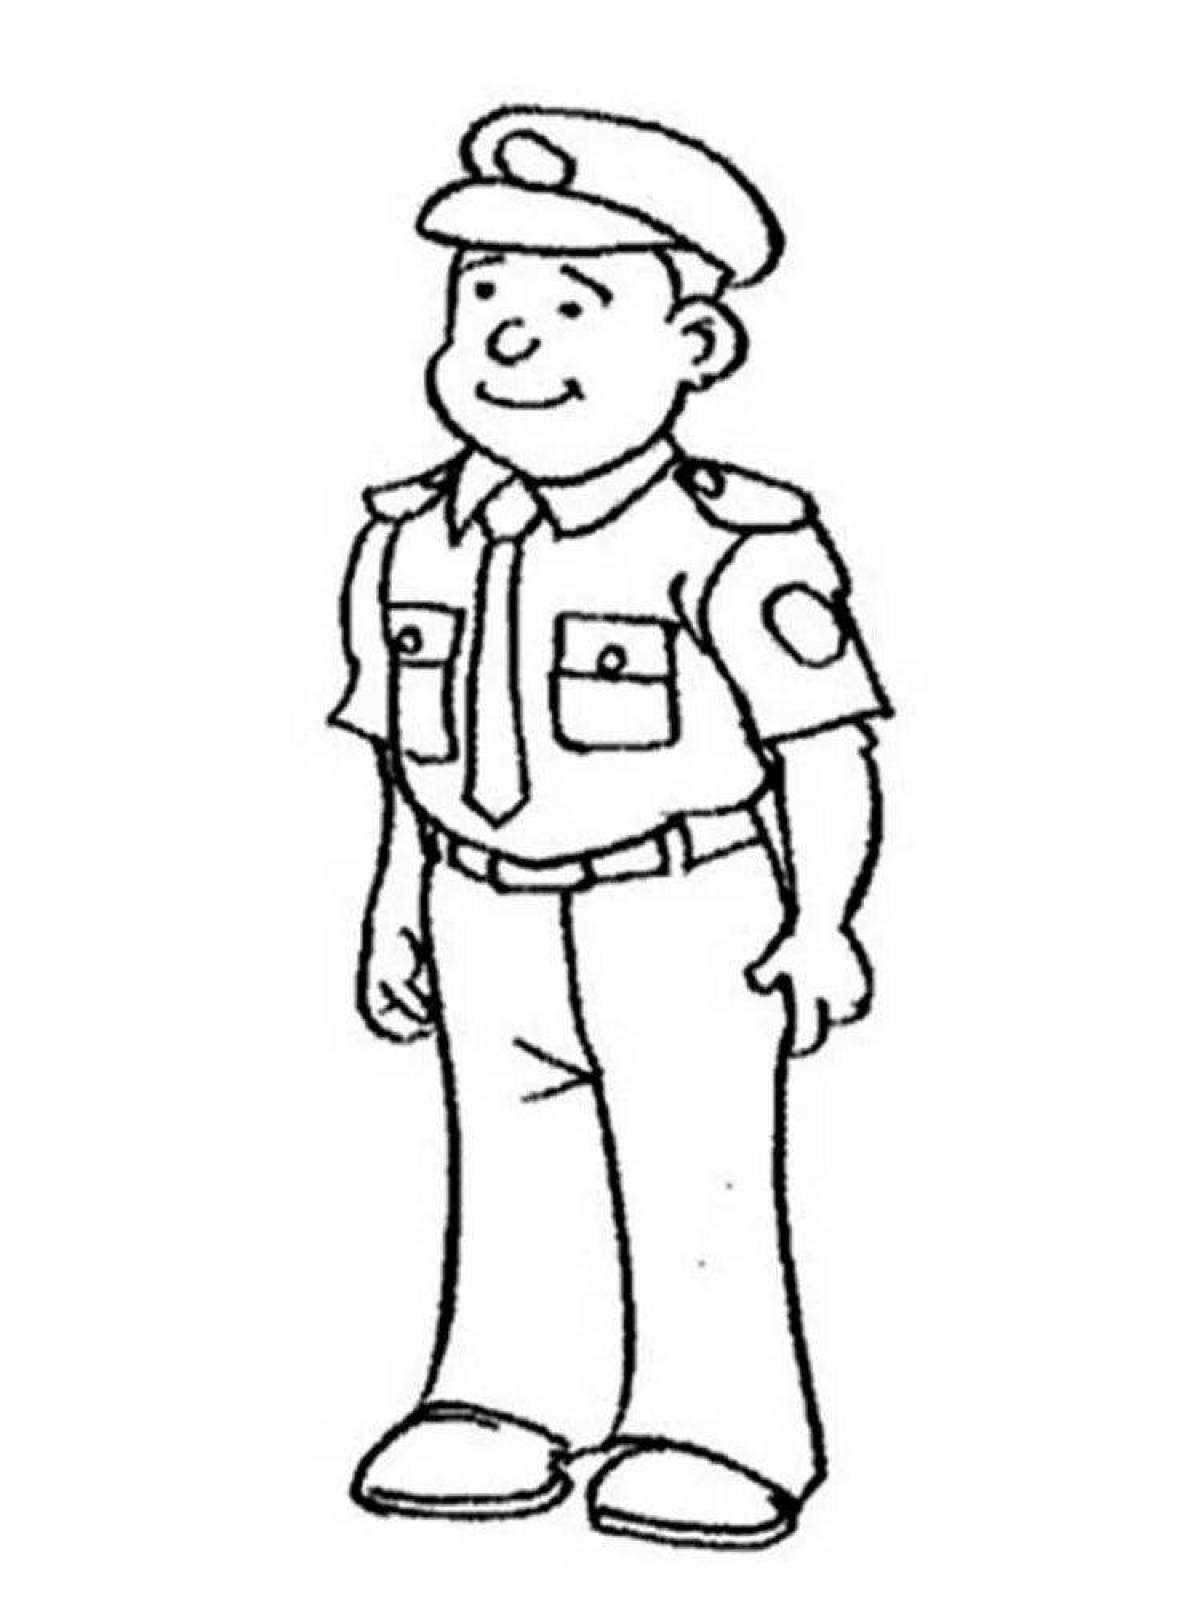 Reliable cop coloring book